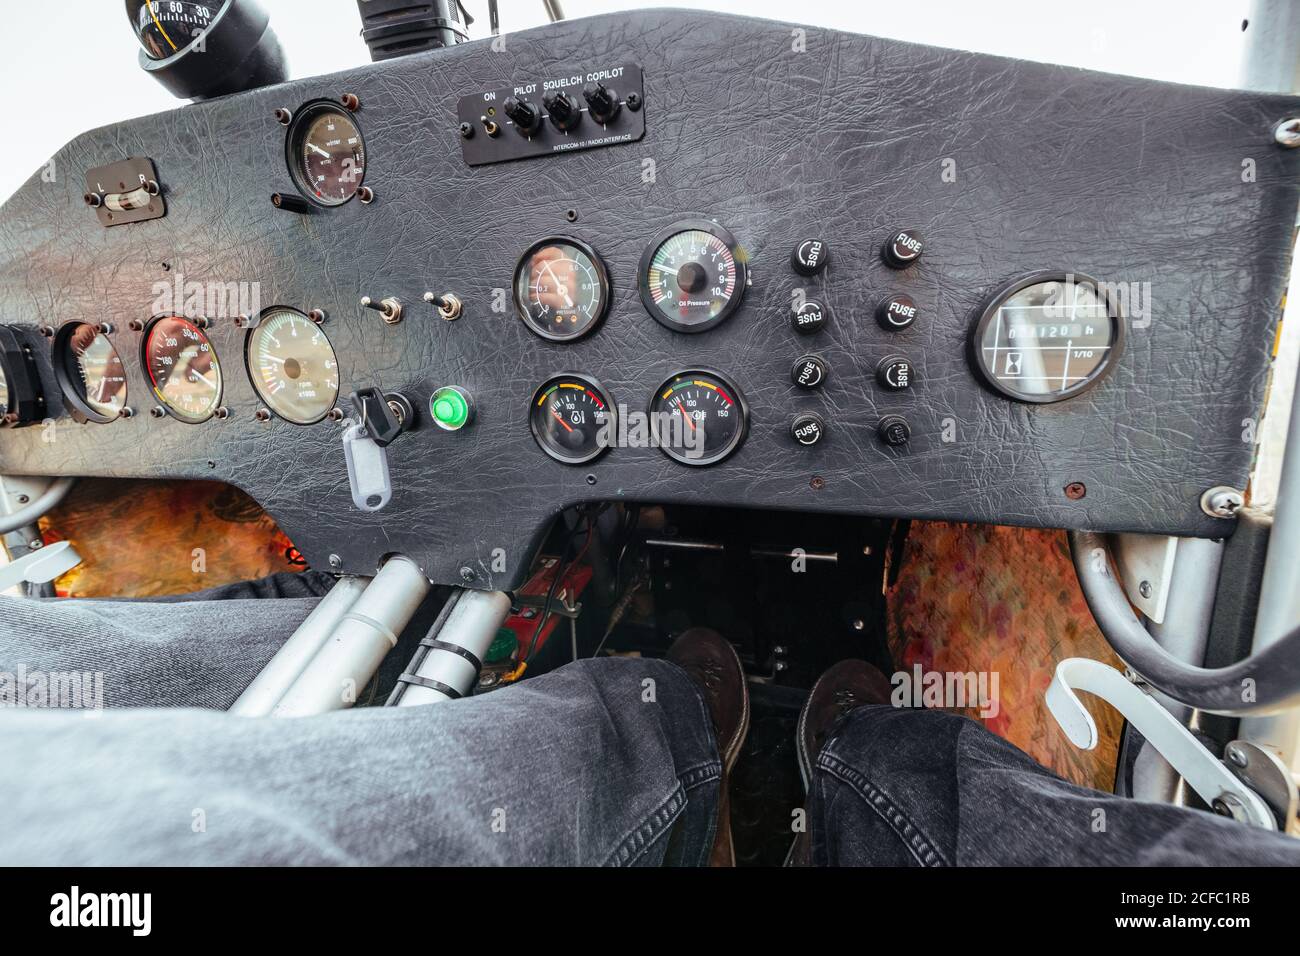 View of an instrument panel inside a cabin of a small plane Stock Photo